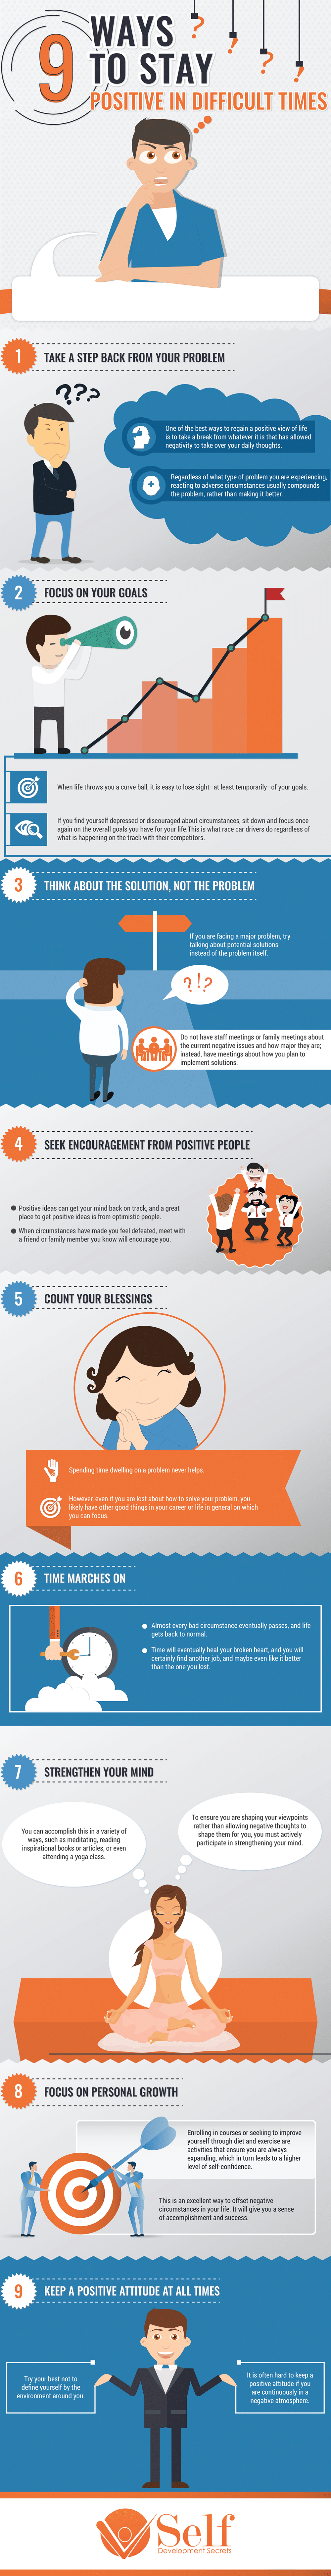 9 Ways To Stay Positive Infographic